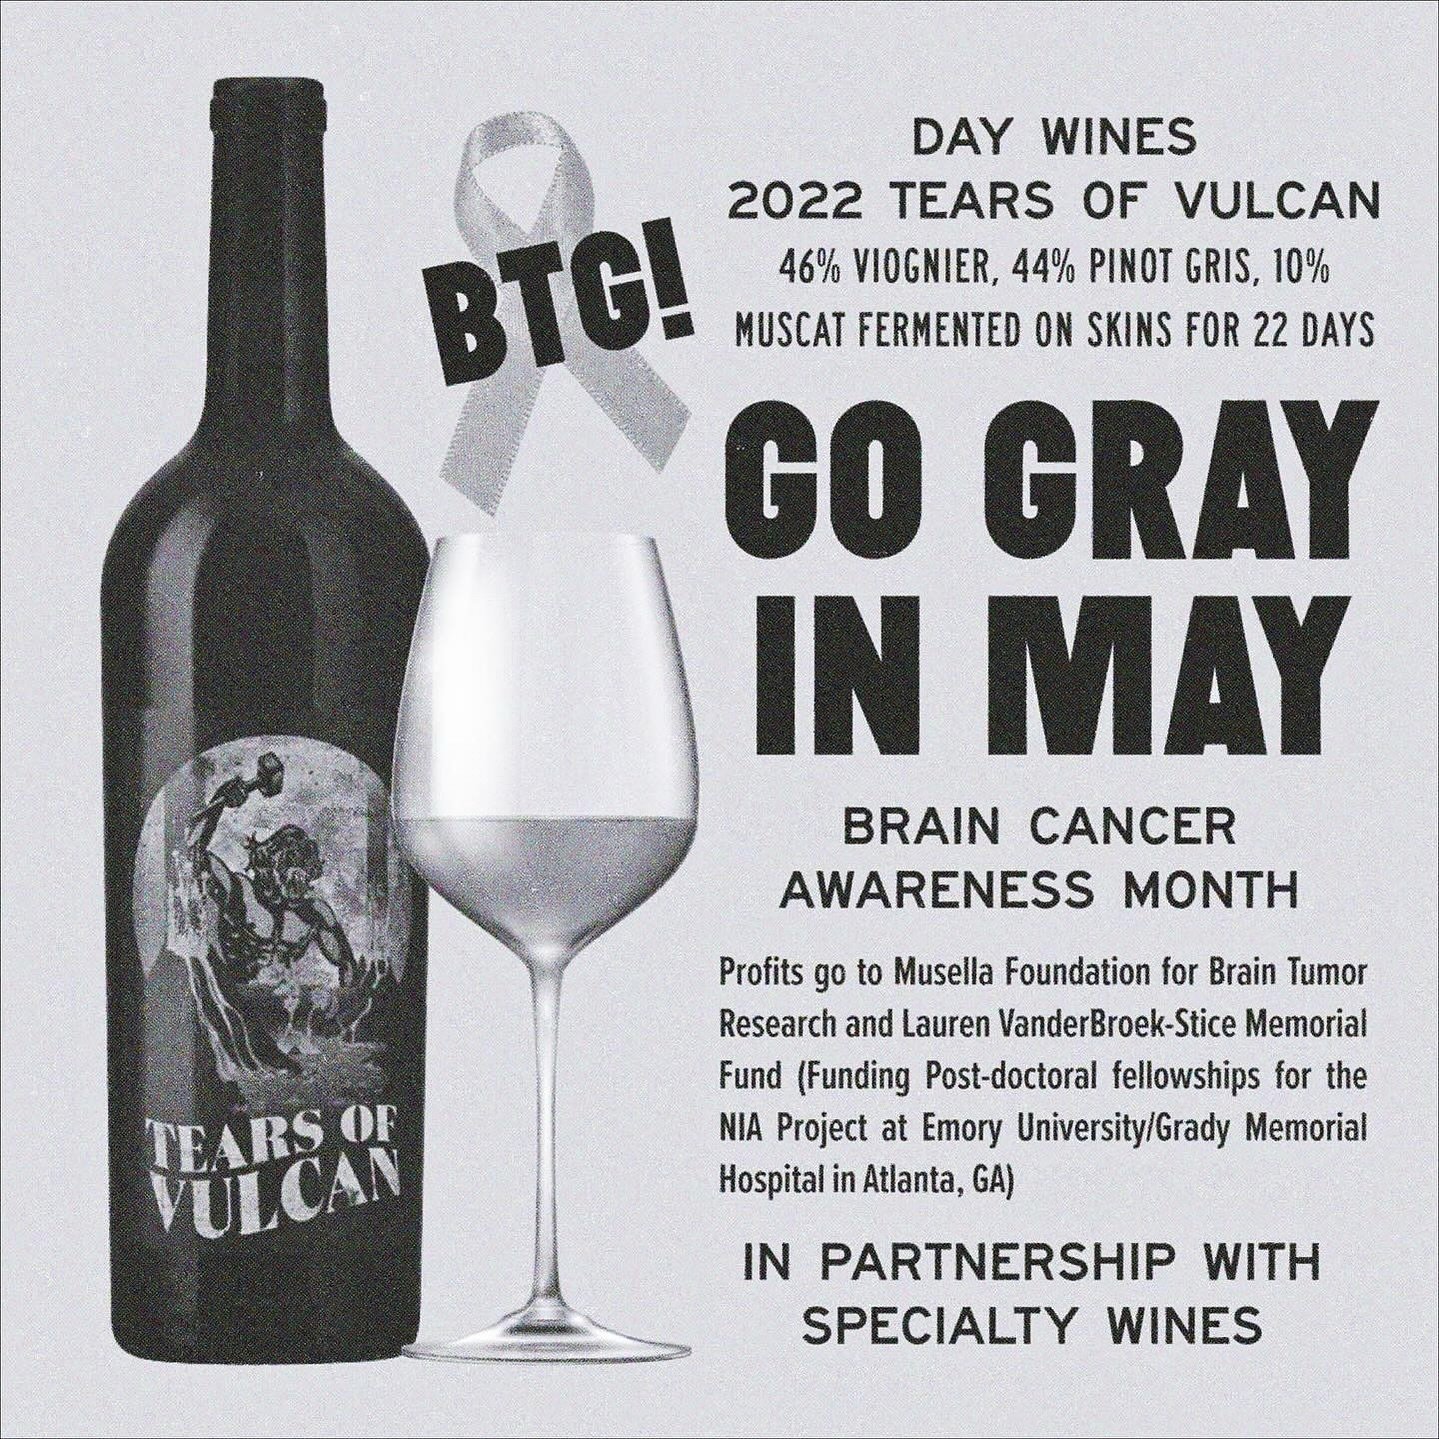 People be asking about this wine 😮&zwj;💨 so much so that we&rsquo;re going to run it through the month! @daywines 2022 Tears of Vulcan BTG! Viogner, Pinot Gris, and Muscat fermented on skins for 22 days - All profits go to Brain Tumor research via 